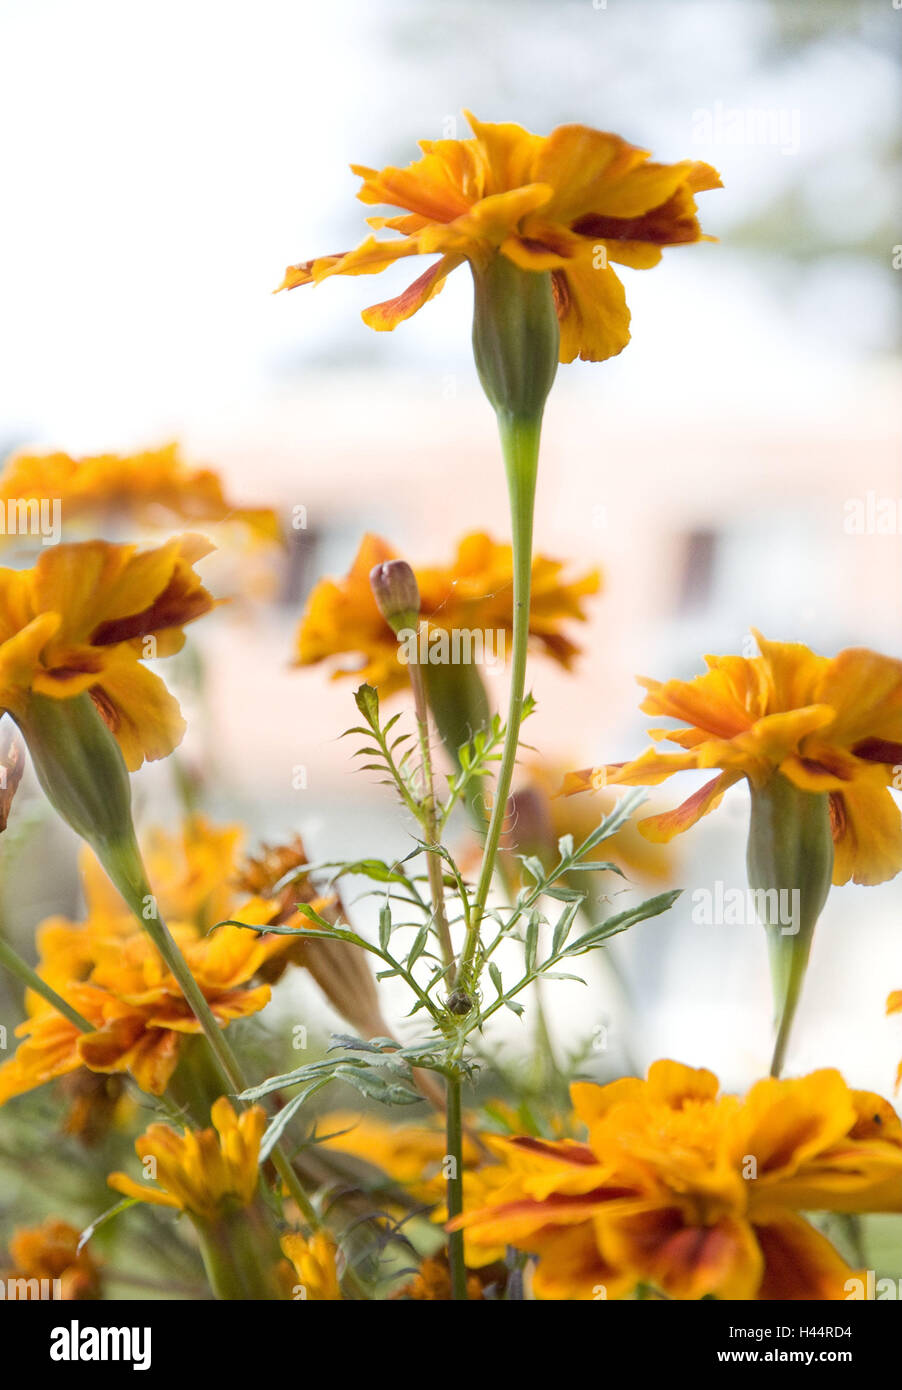 French marigolds, French marigolds spec., there blossom, flowerbed, flowers, plants, French marigolds, blossom, blossoms, period bloom, nature, summery, orange, Stock Photo